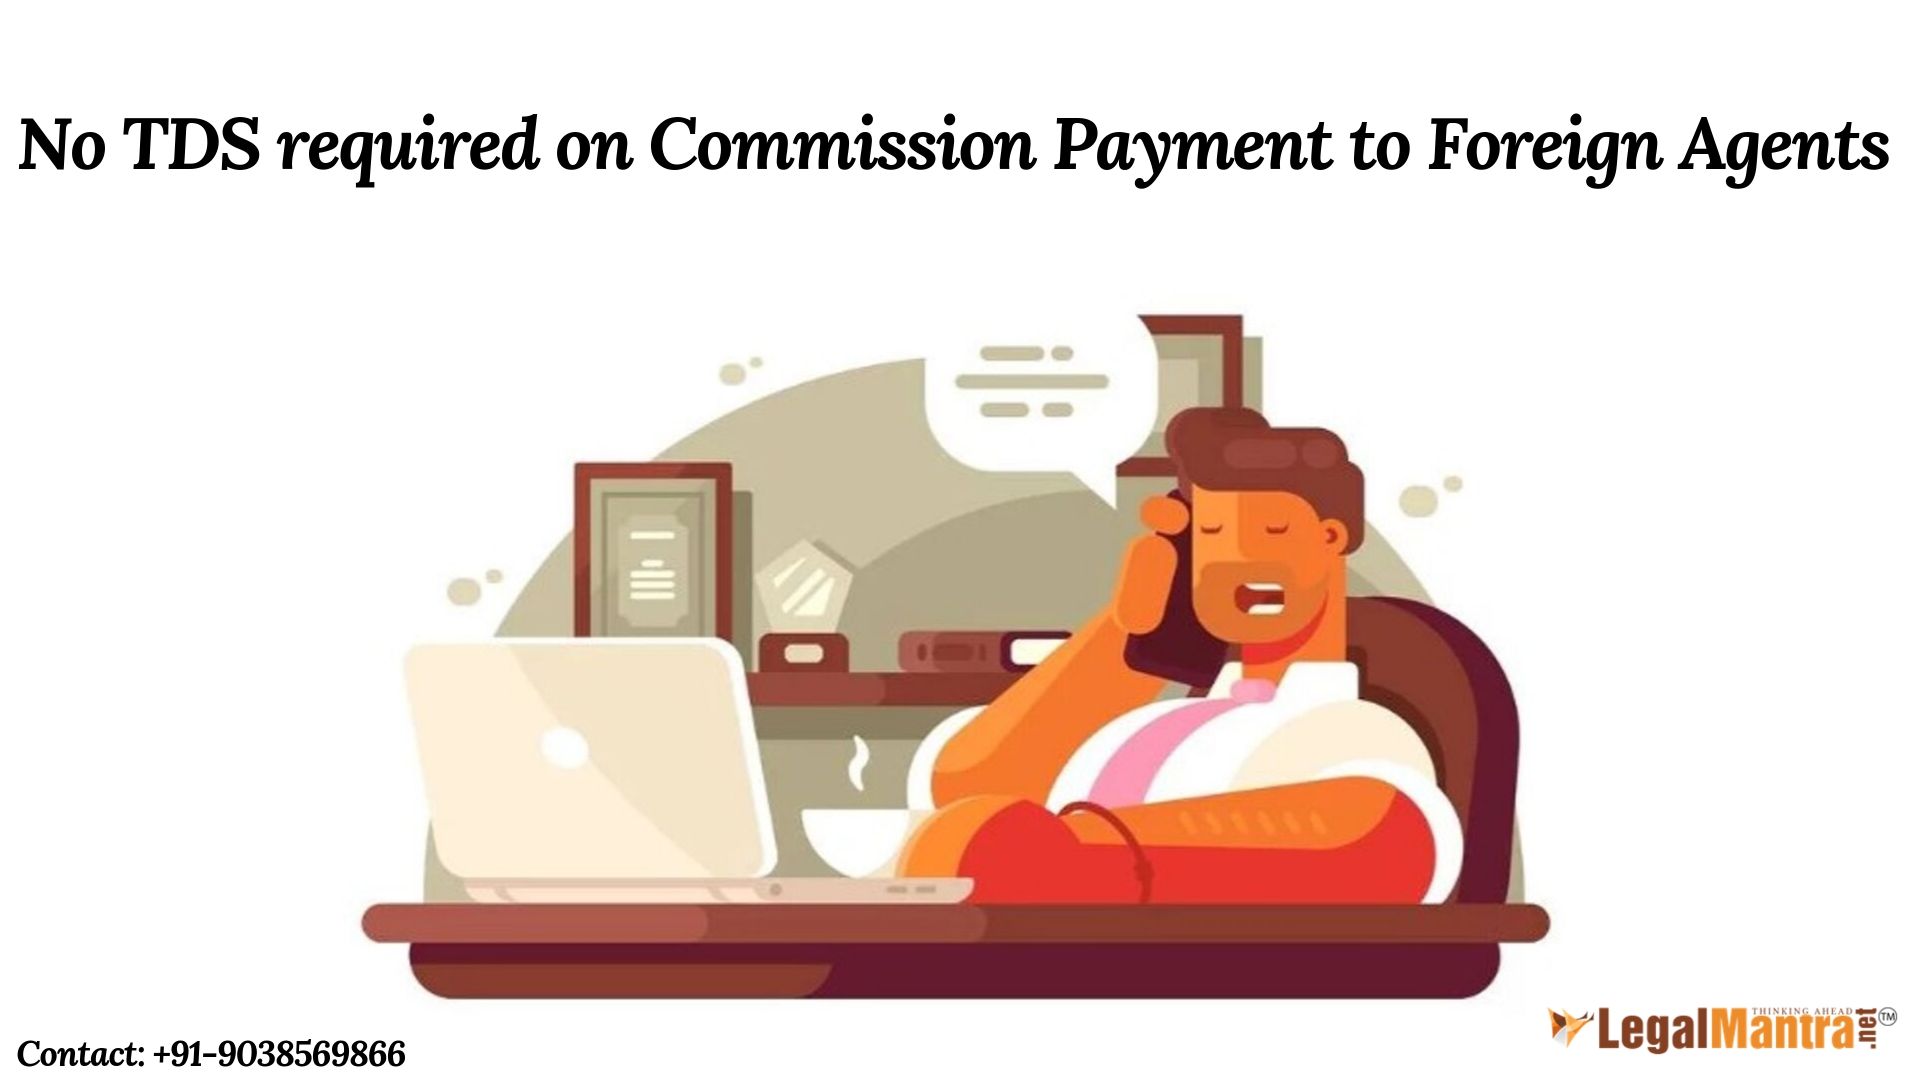 No TDS required on Commission Payment to Foreign Agents on Rendering of Services and Receipt of Payments outside India if There is no PE in India